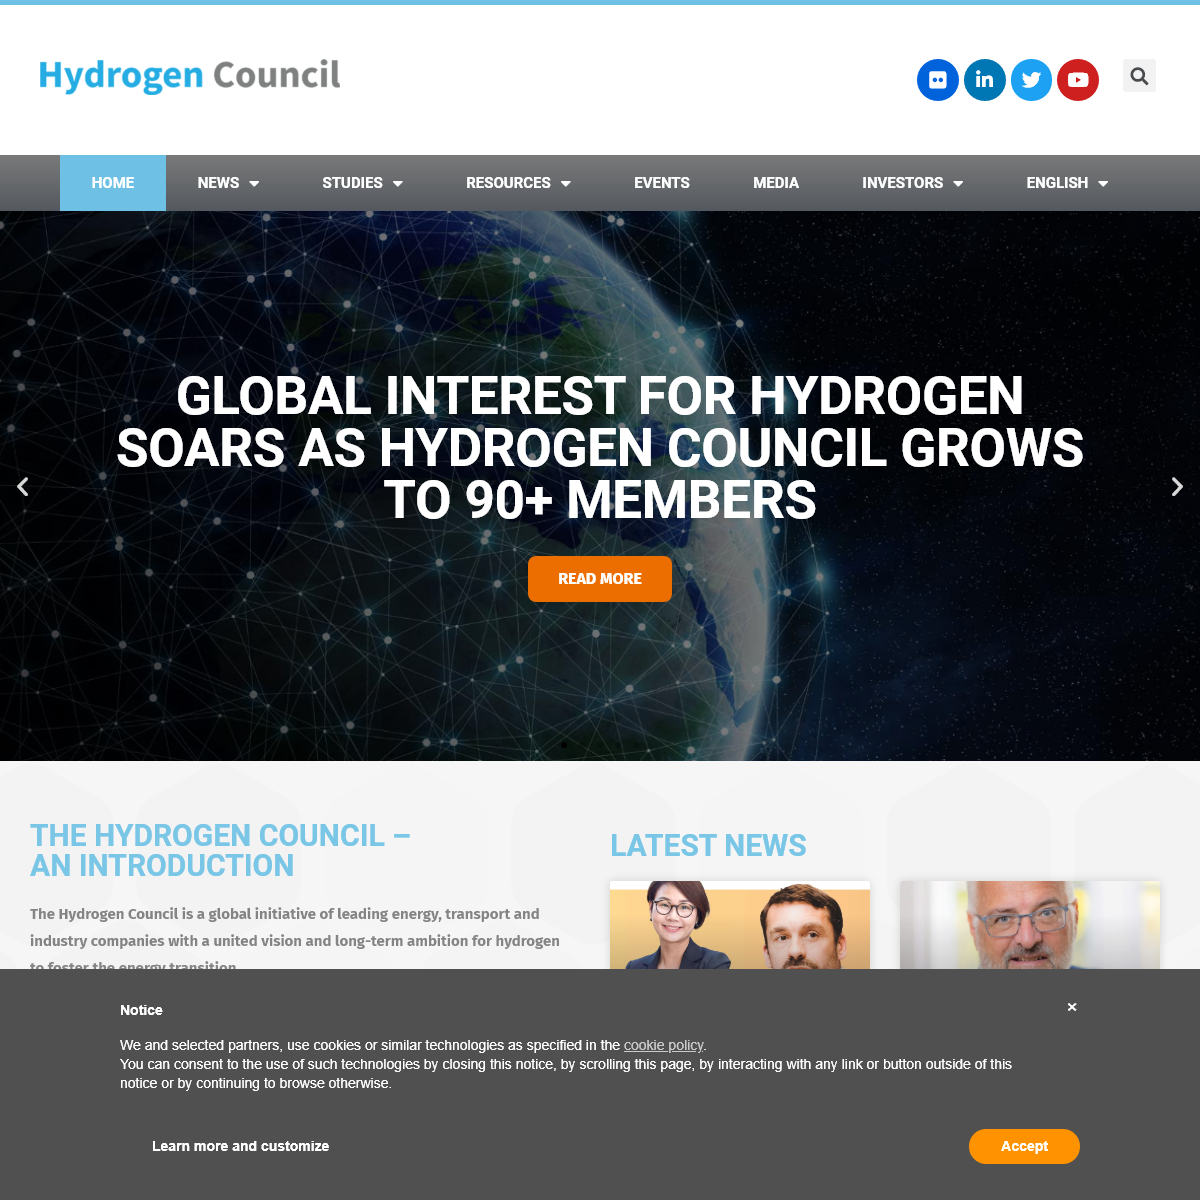 A complete backup of hydrogencouncil.com